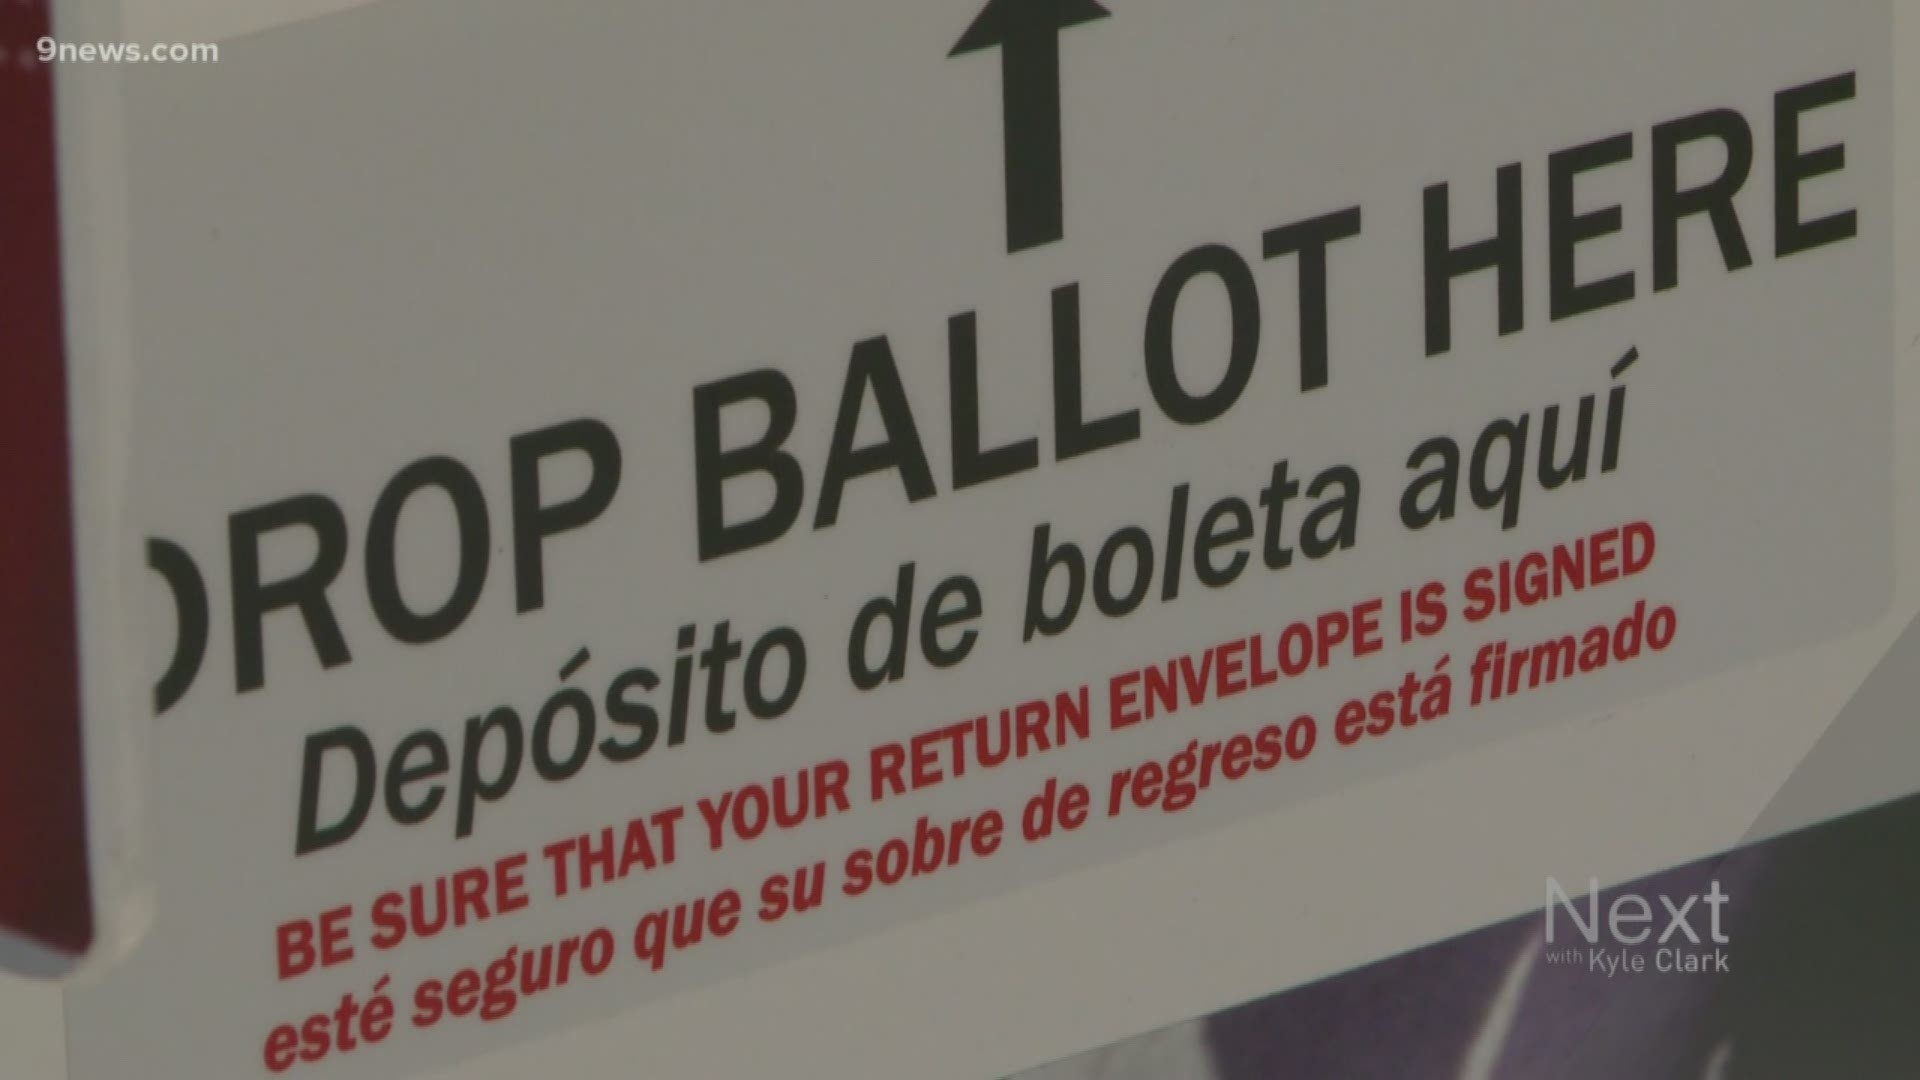 Some legislators to want make sure more people are able to vote despite a language barrier.